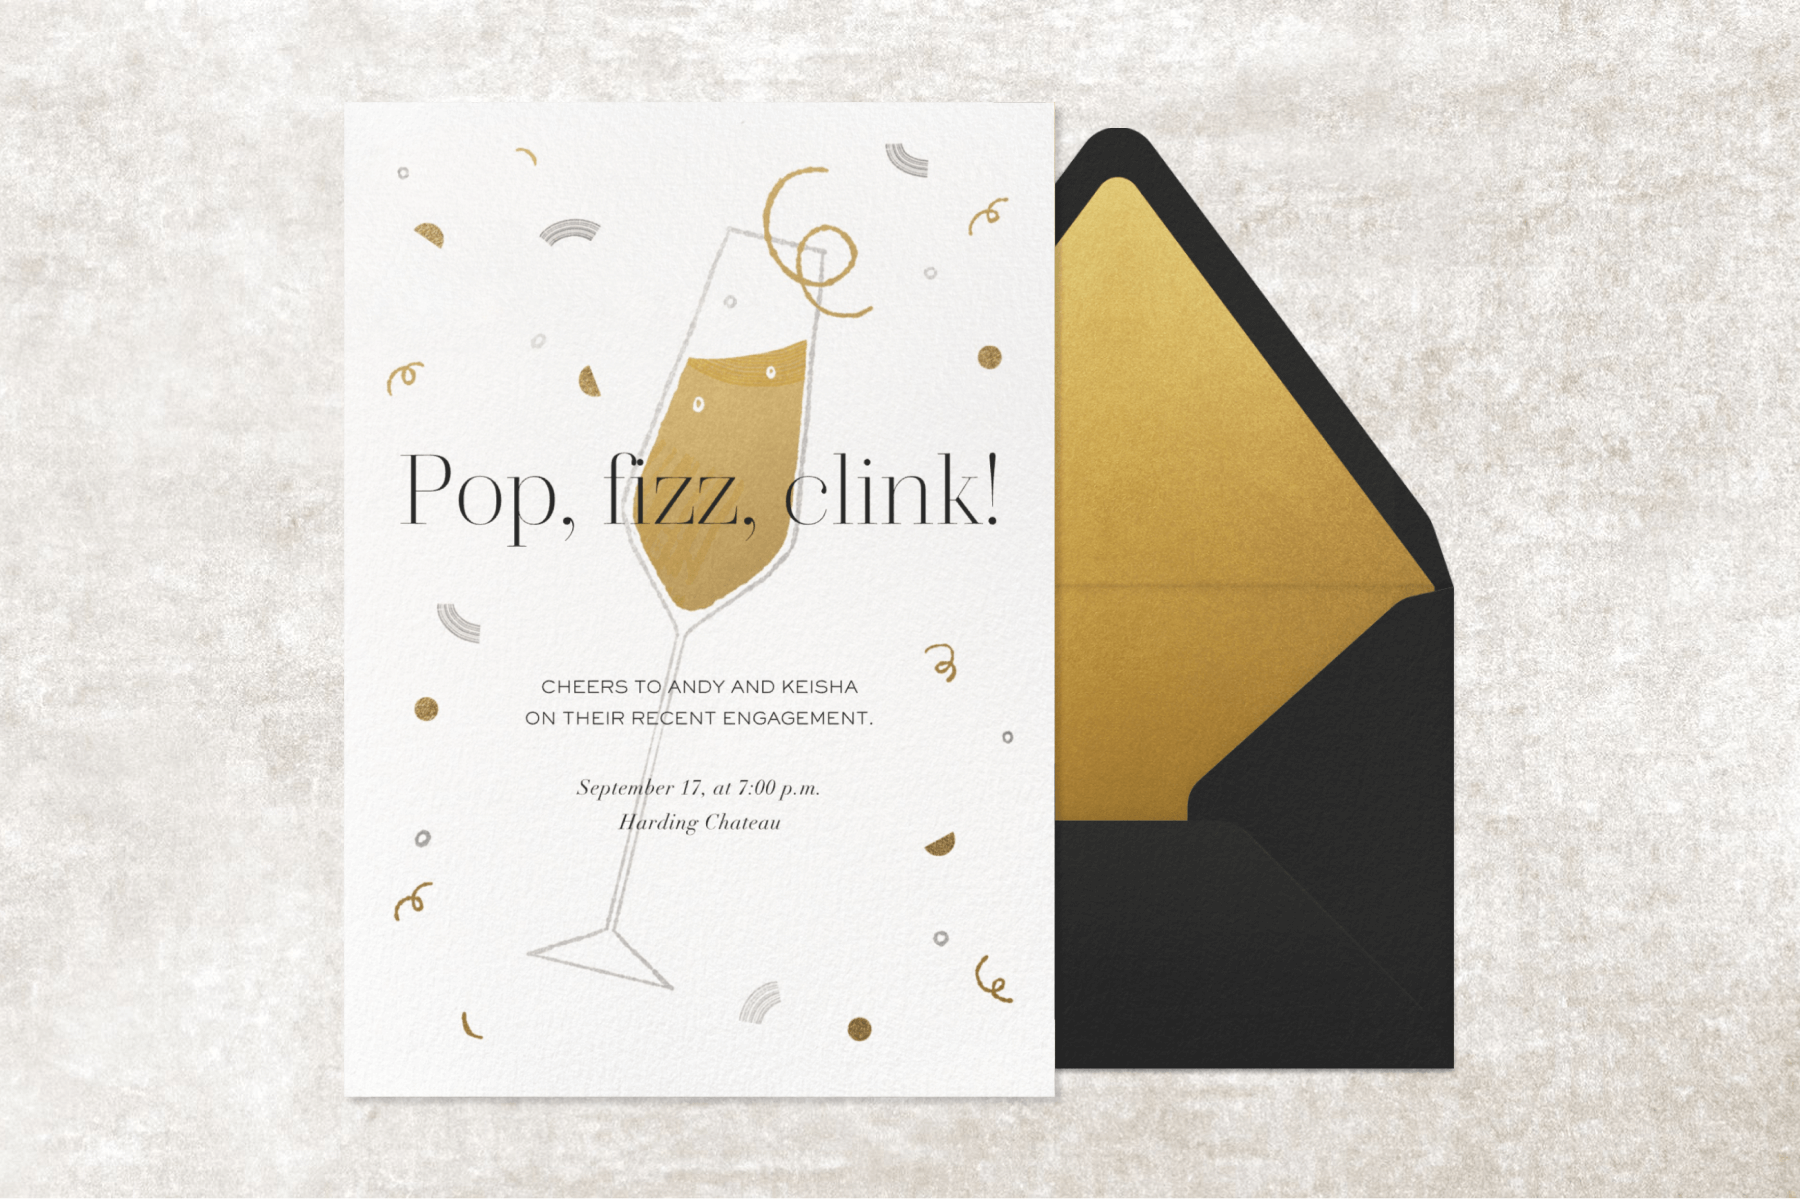 An engagement party invitation with an illustration of a Champagne glass and the words “Pop, fizz, clink!”